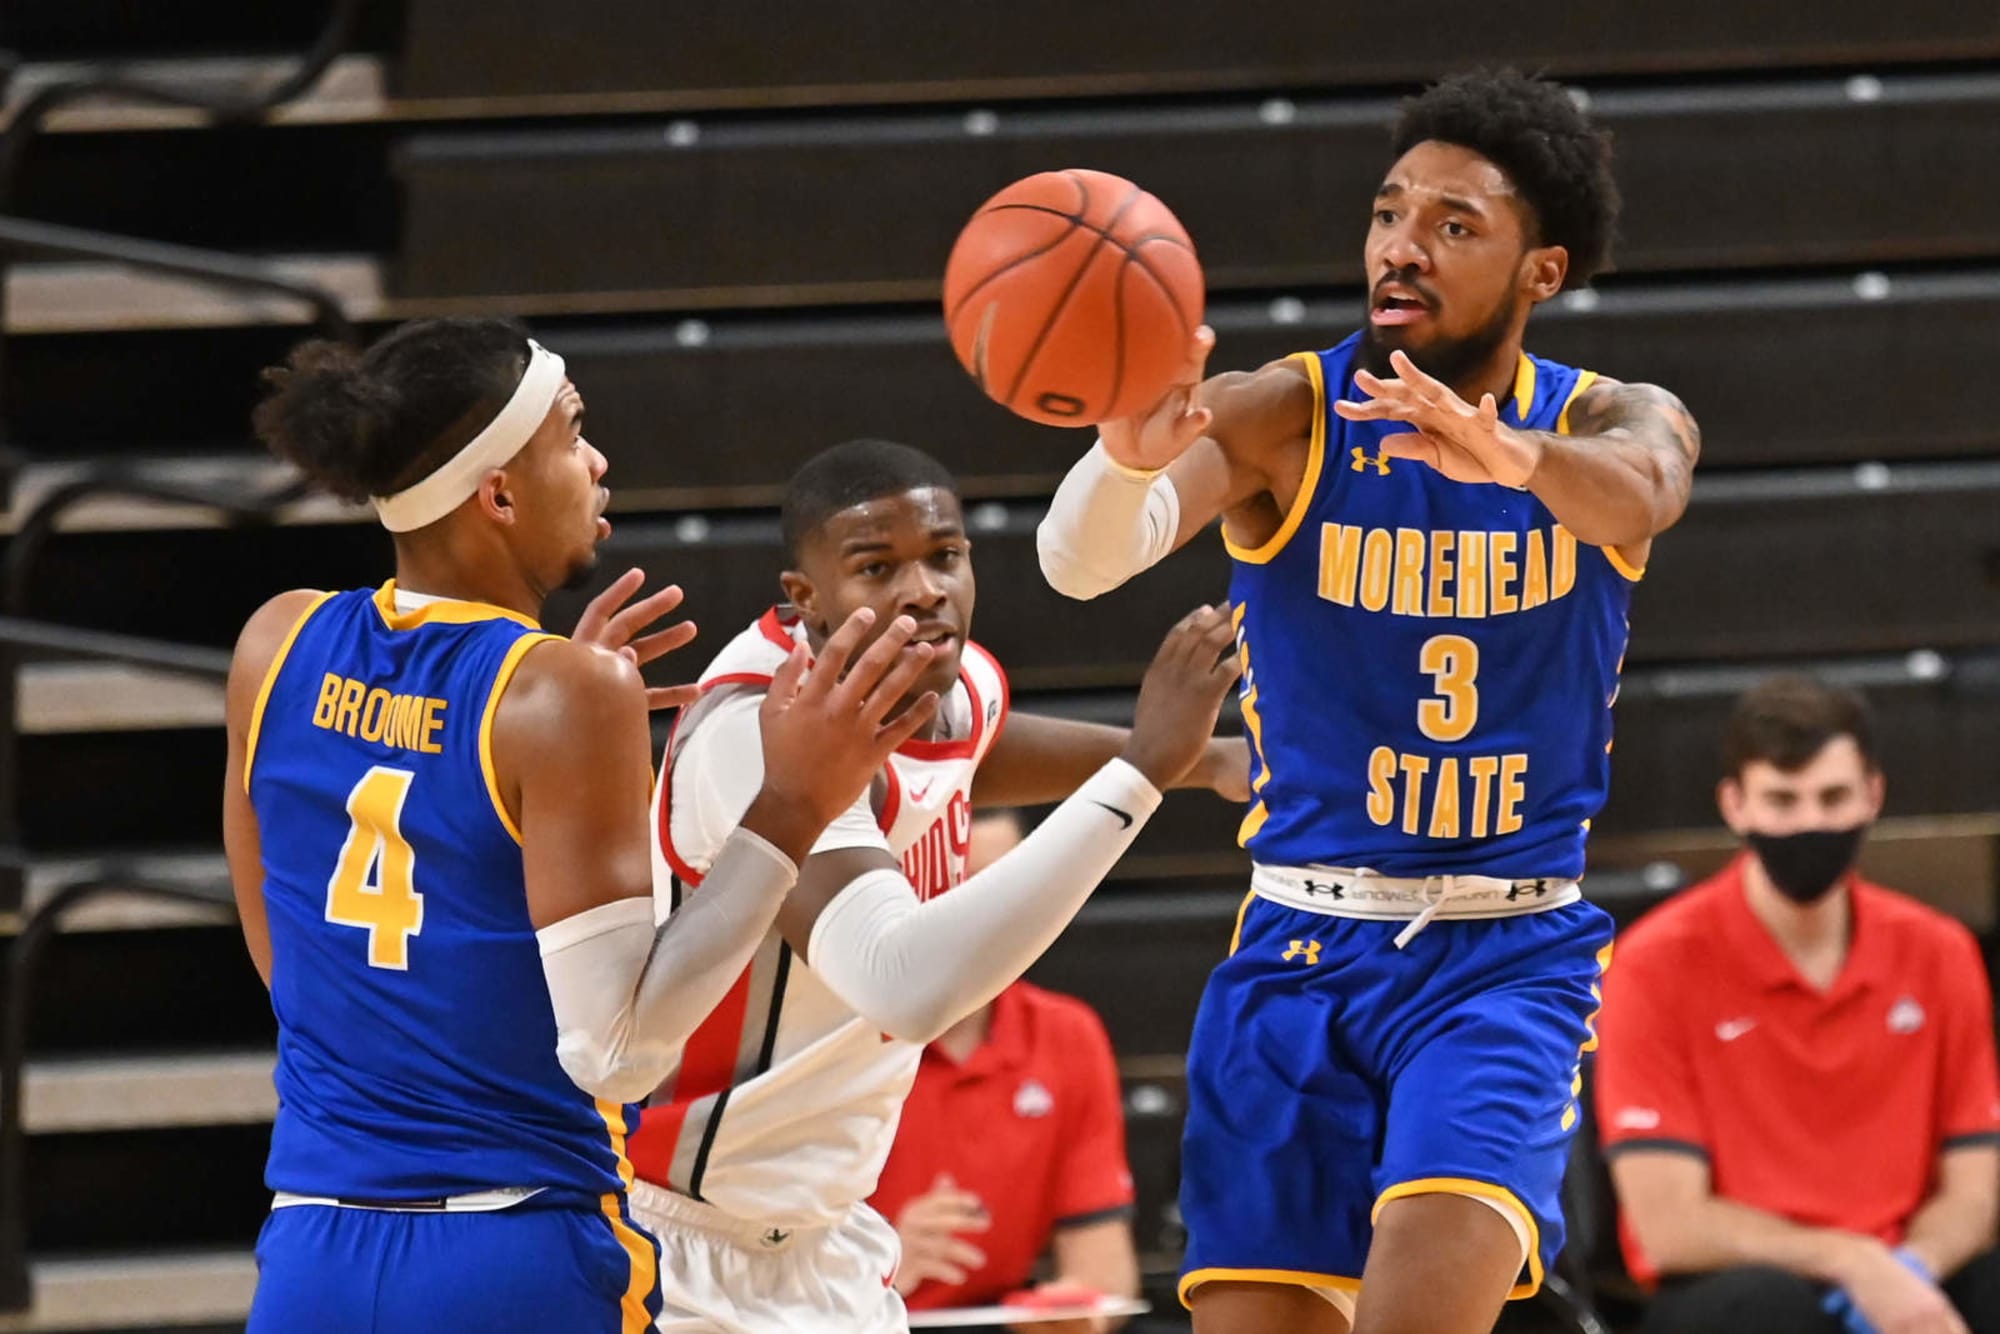 Does Morehead State Basketball have what it takes to upset WVU?